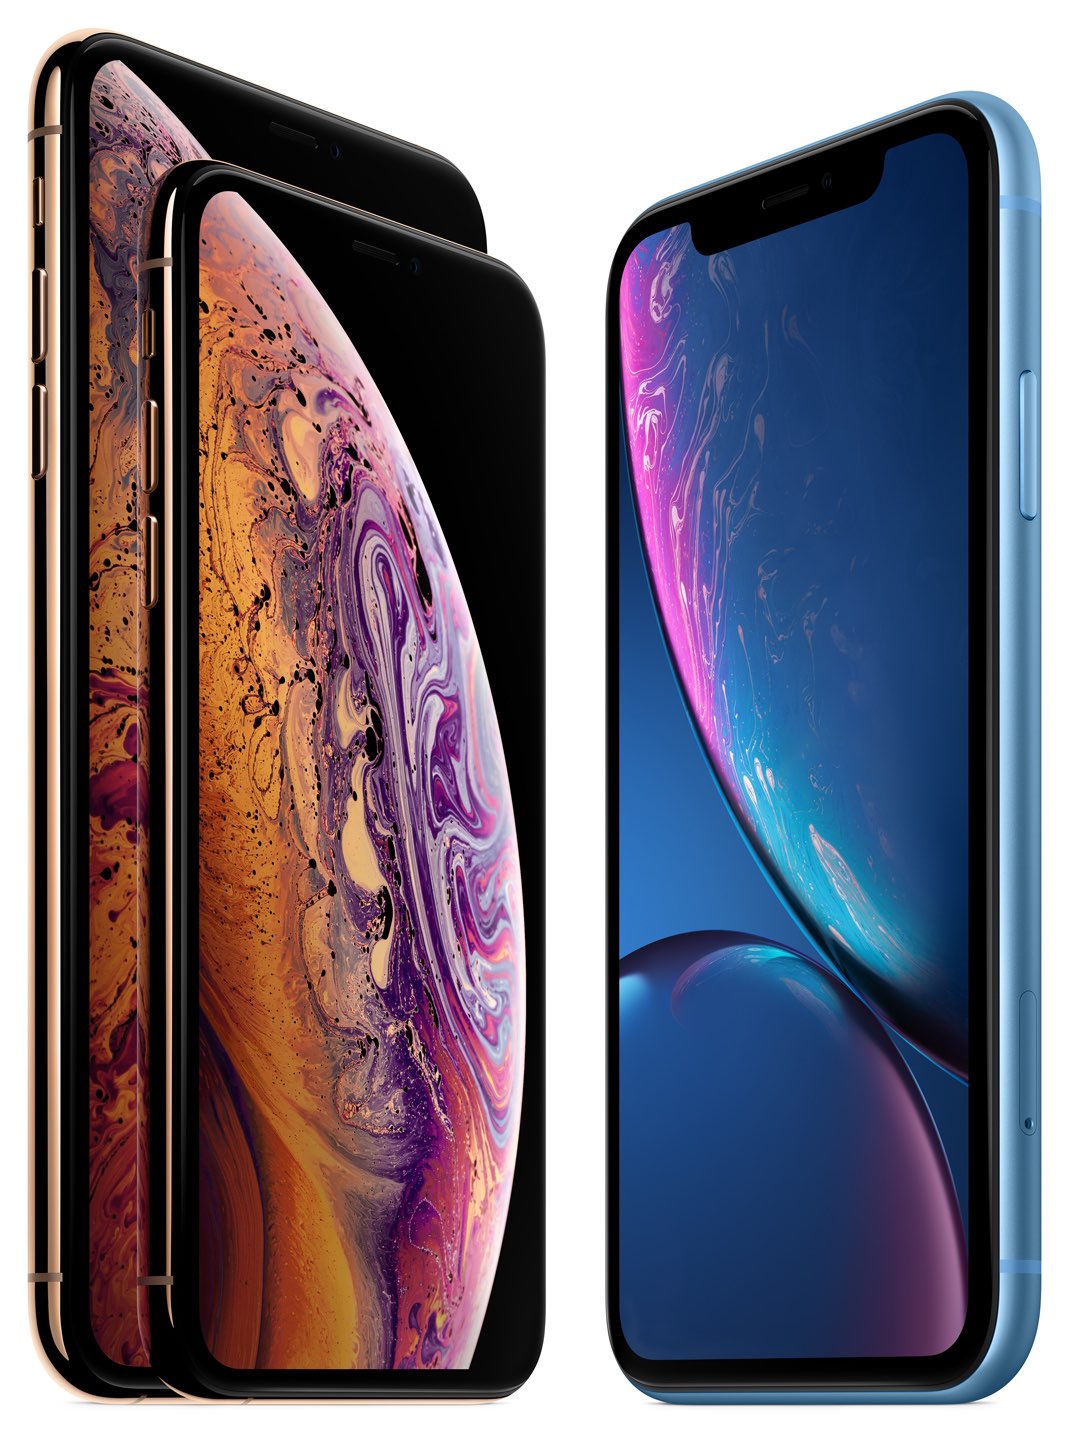 iPhone XS Max and iPhone XR